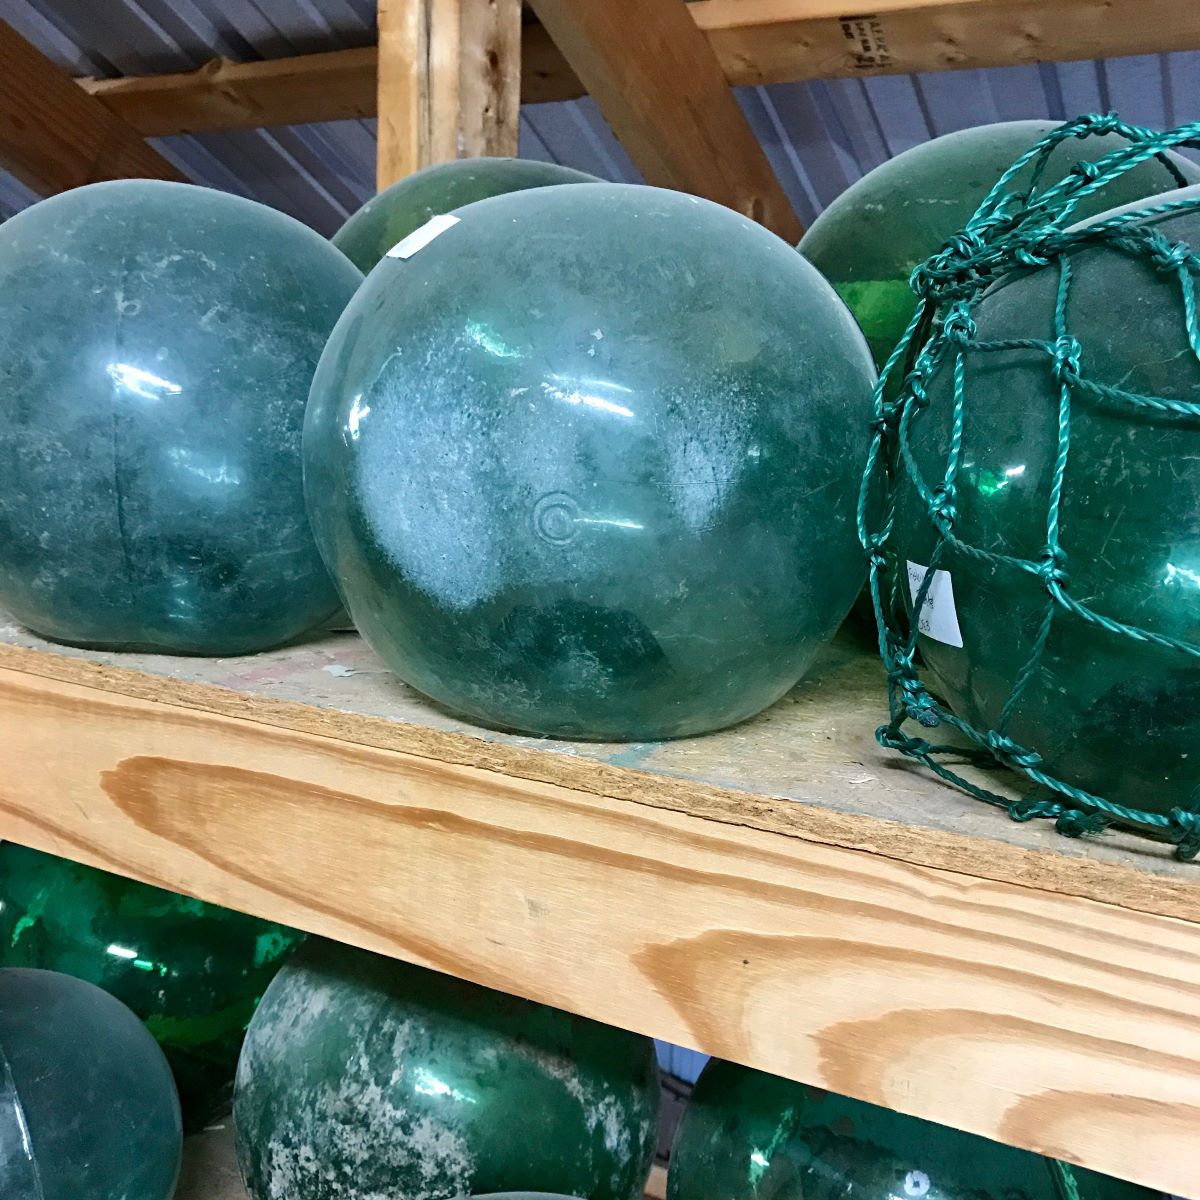 https://storables.com/wp-content/uploads/2024/01/how-much-are-glass-floats-worth-1706113231.jpg